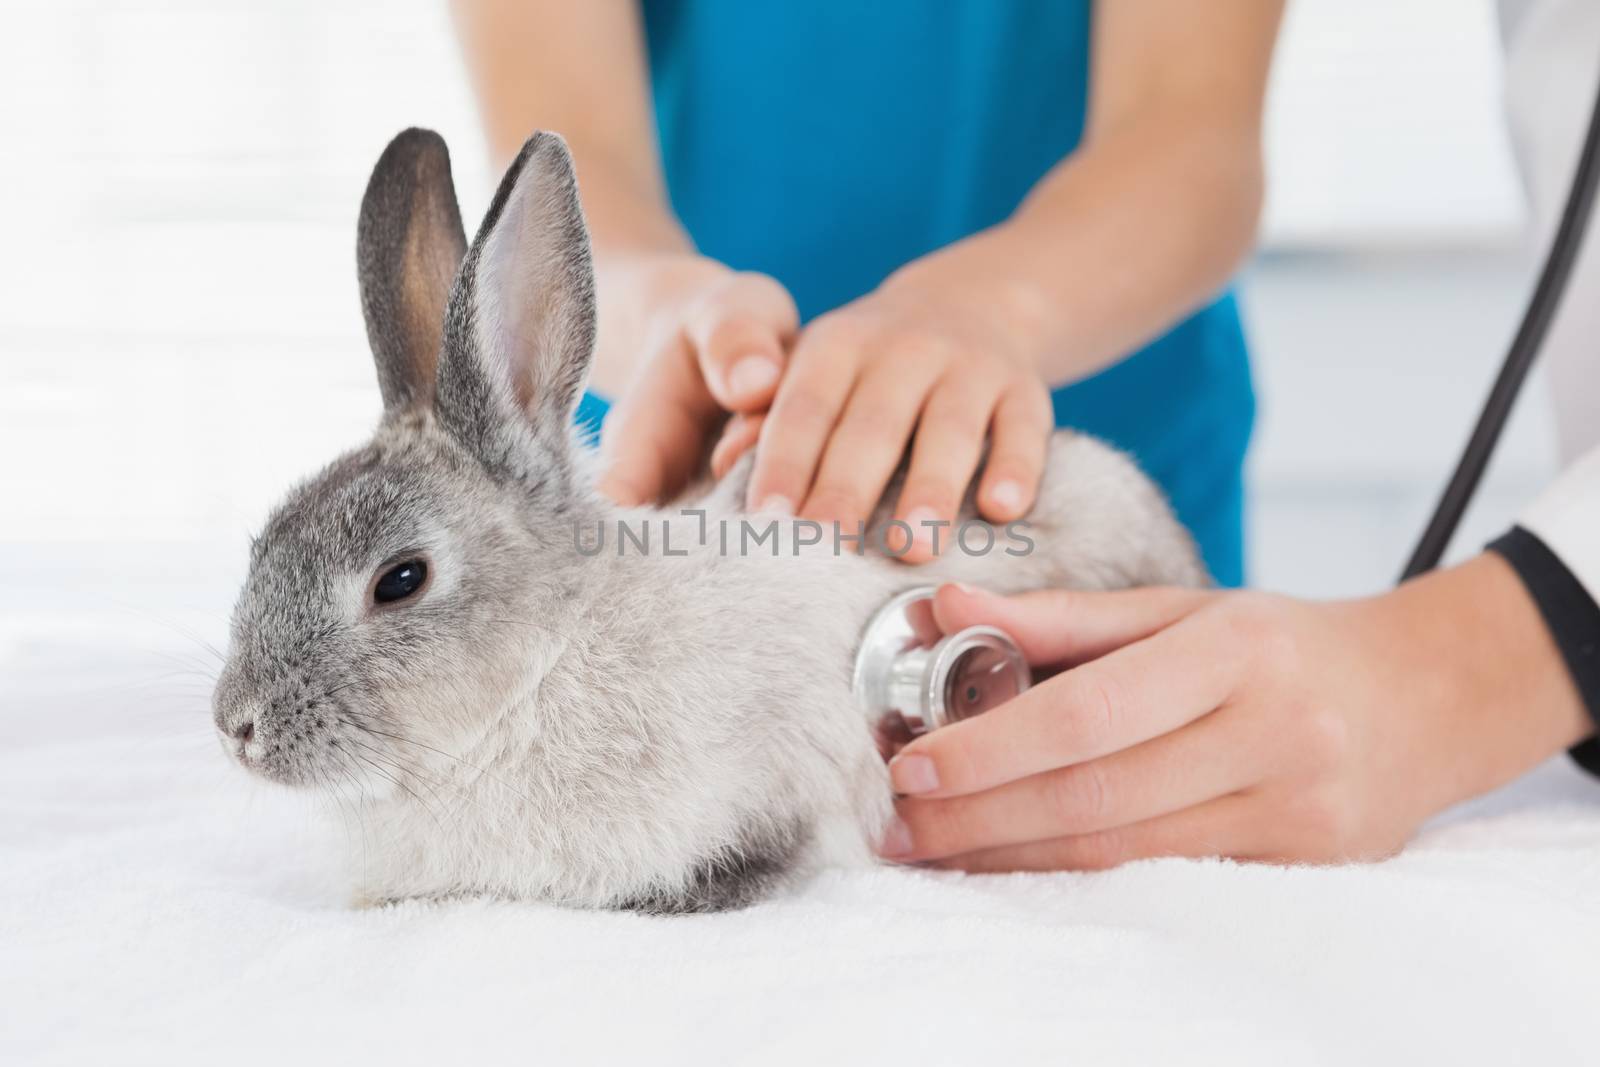 Vet examining a bunny with its owner  by Wavebreakmedia